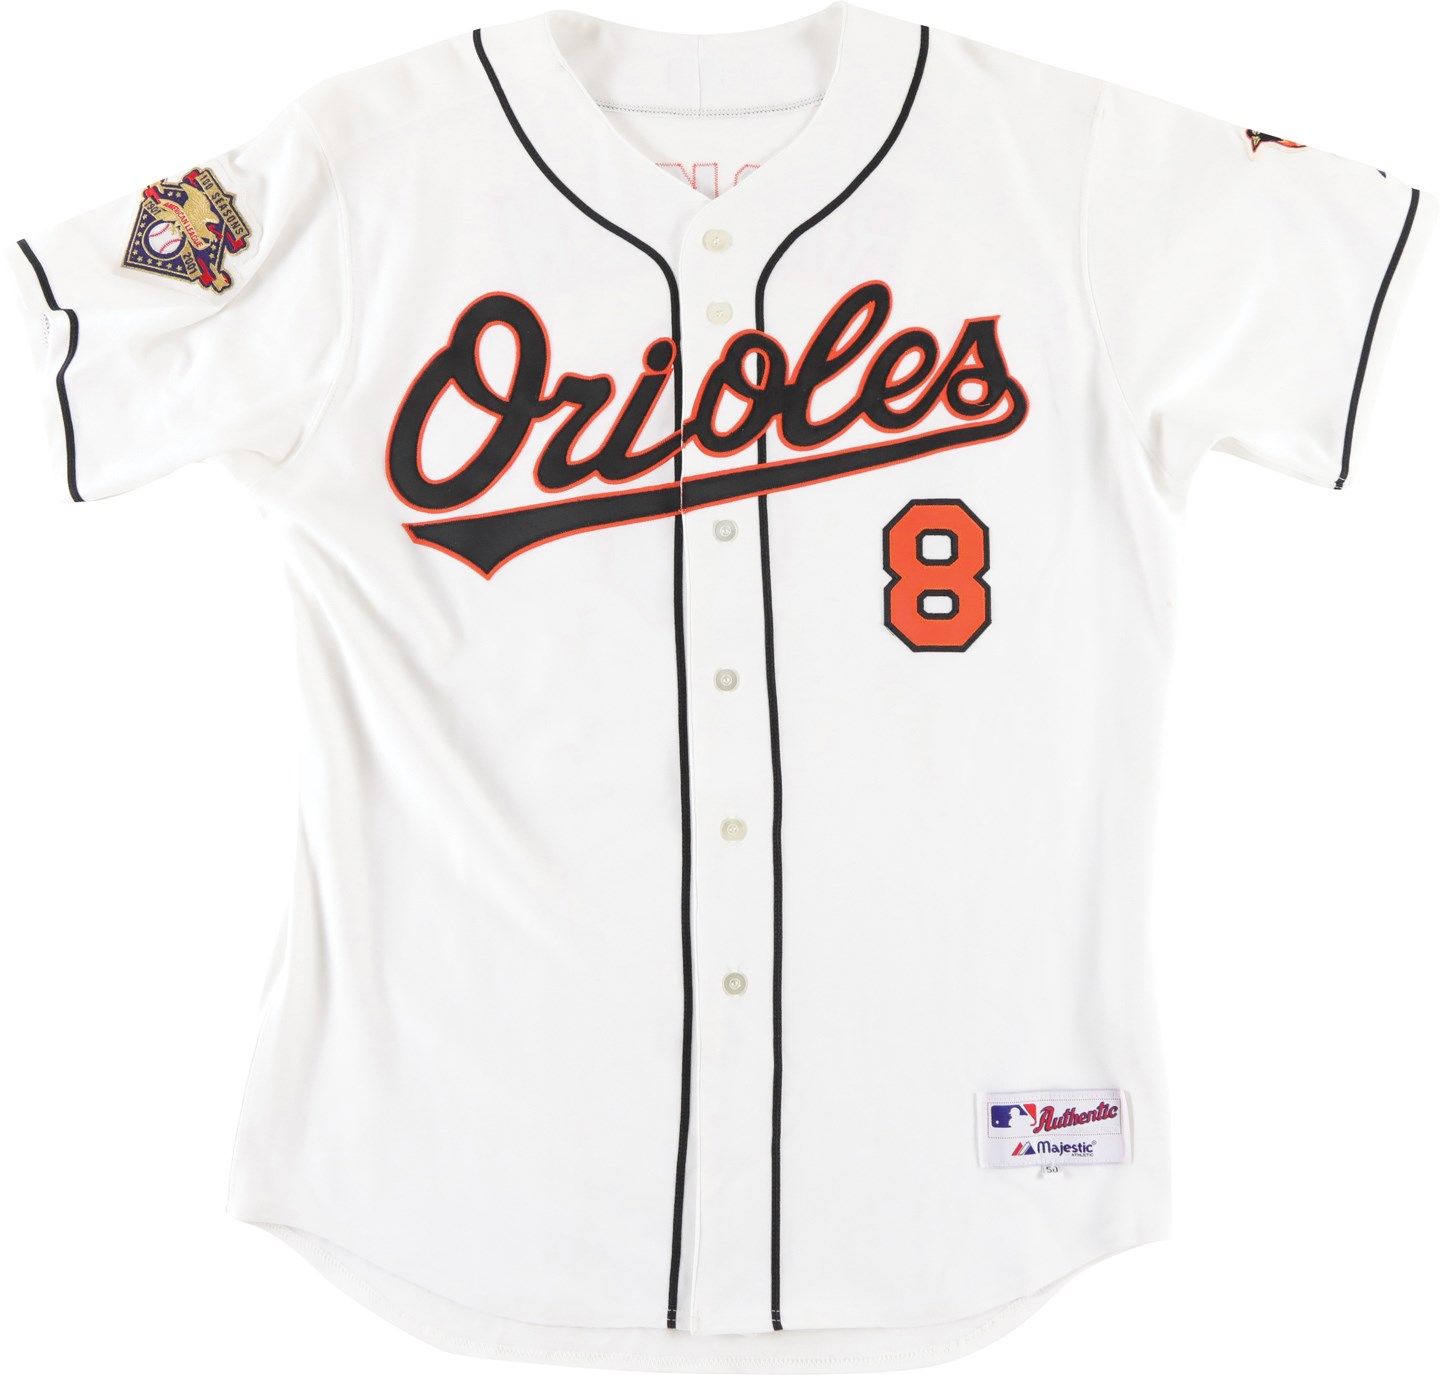 Baseball Autographs - 2001 Cal Ripken Jr. Baltimore Orioles Signed Professional Model Jersey Gifted to Cito Gaston